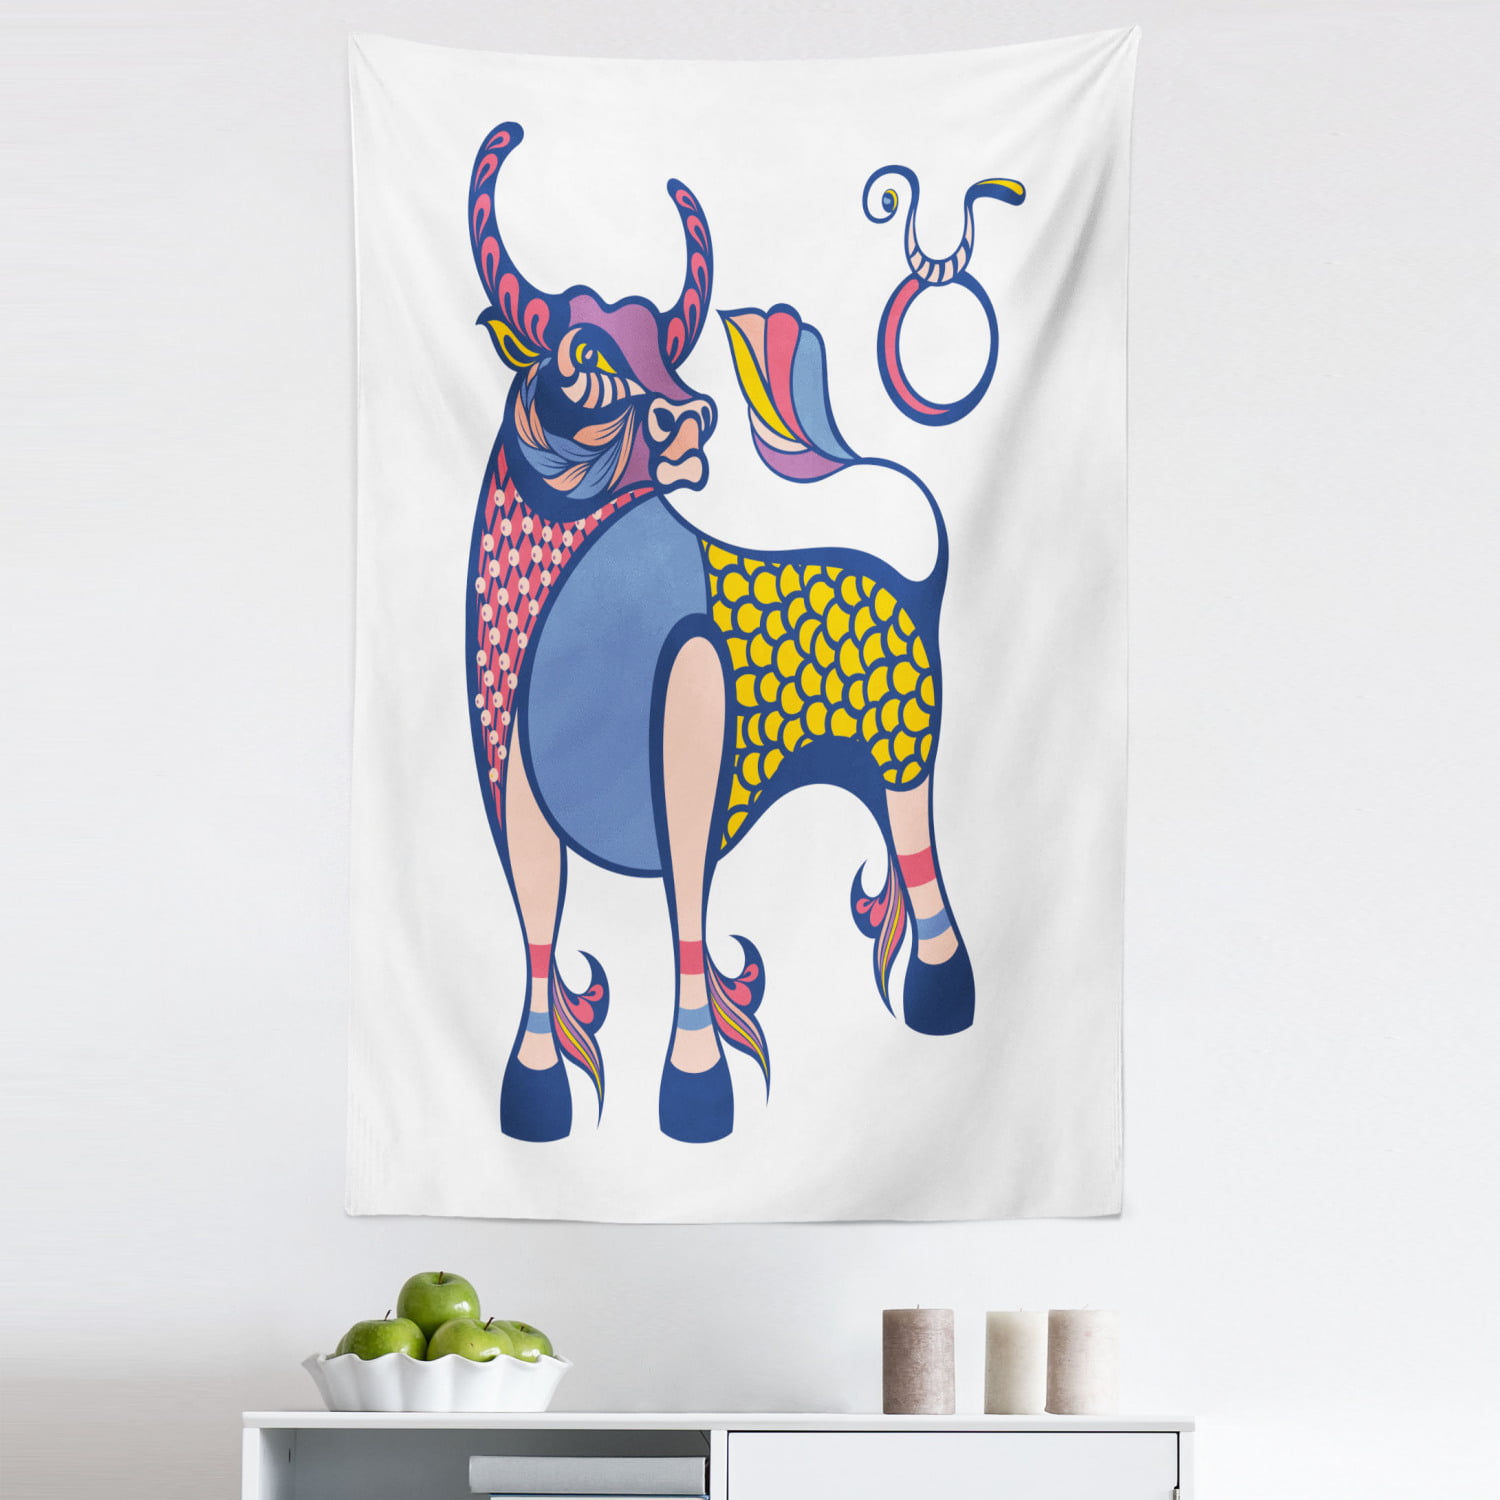 Zodiac Signs Tapestry, Horoscope Themed Illustration of Taurus Animal Symbol  Colorful Detailed, Fabric Wall Hanging Decor for Bedroom Living Room Dorm,  5 Sizes, White Multicolor, by Ambesonne 